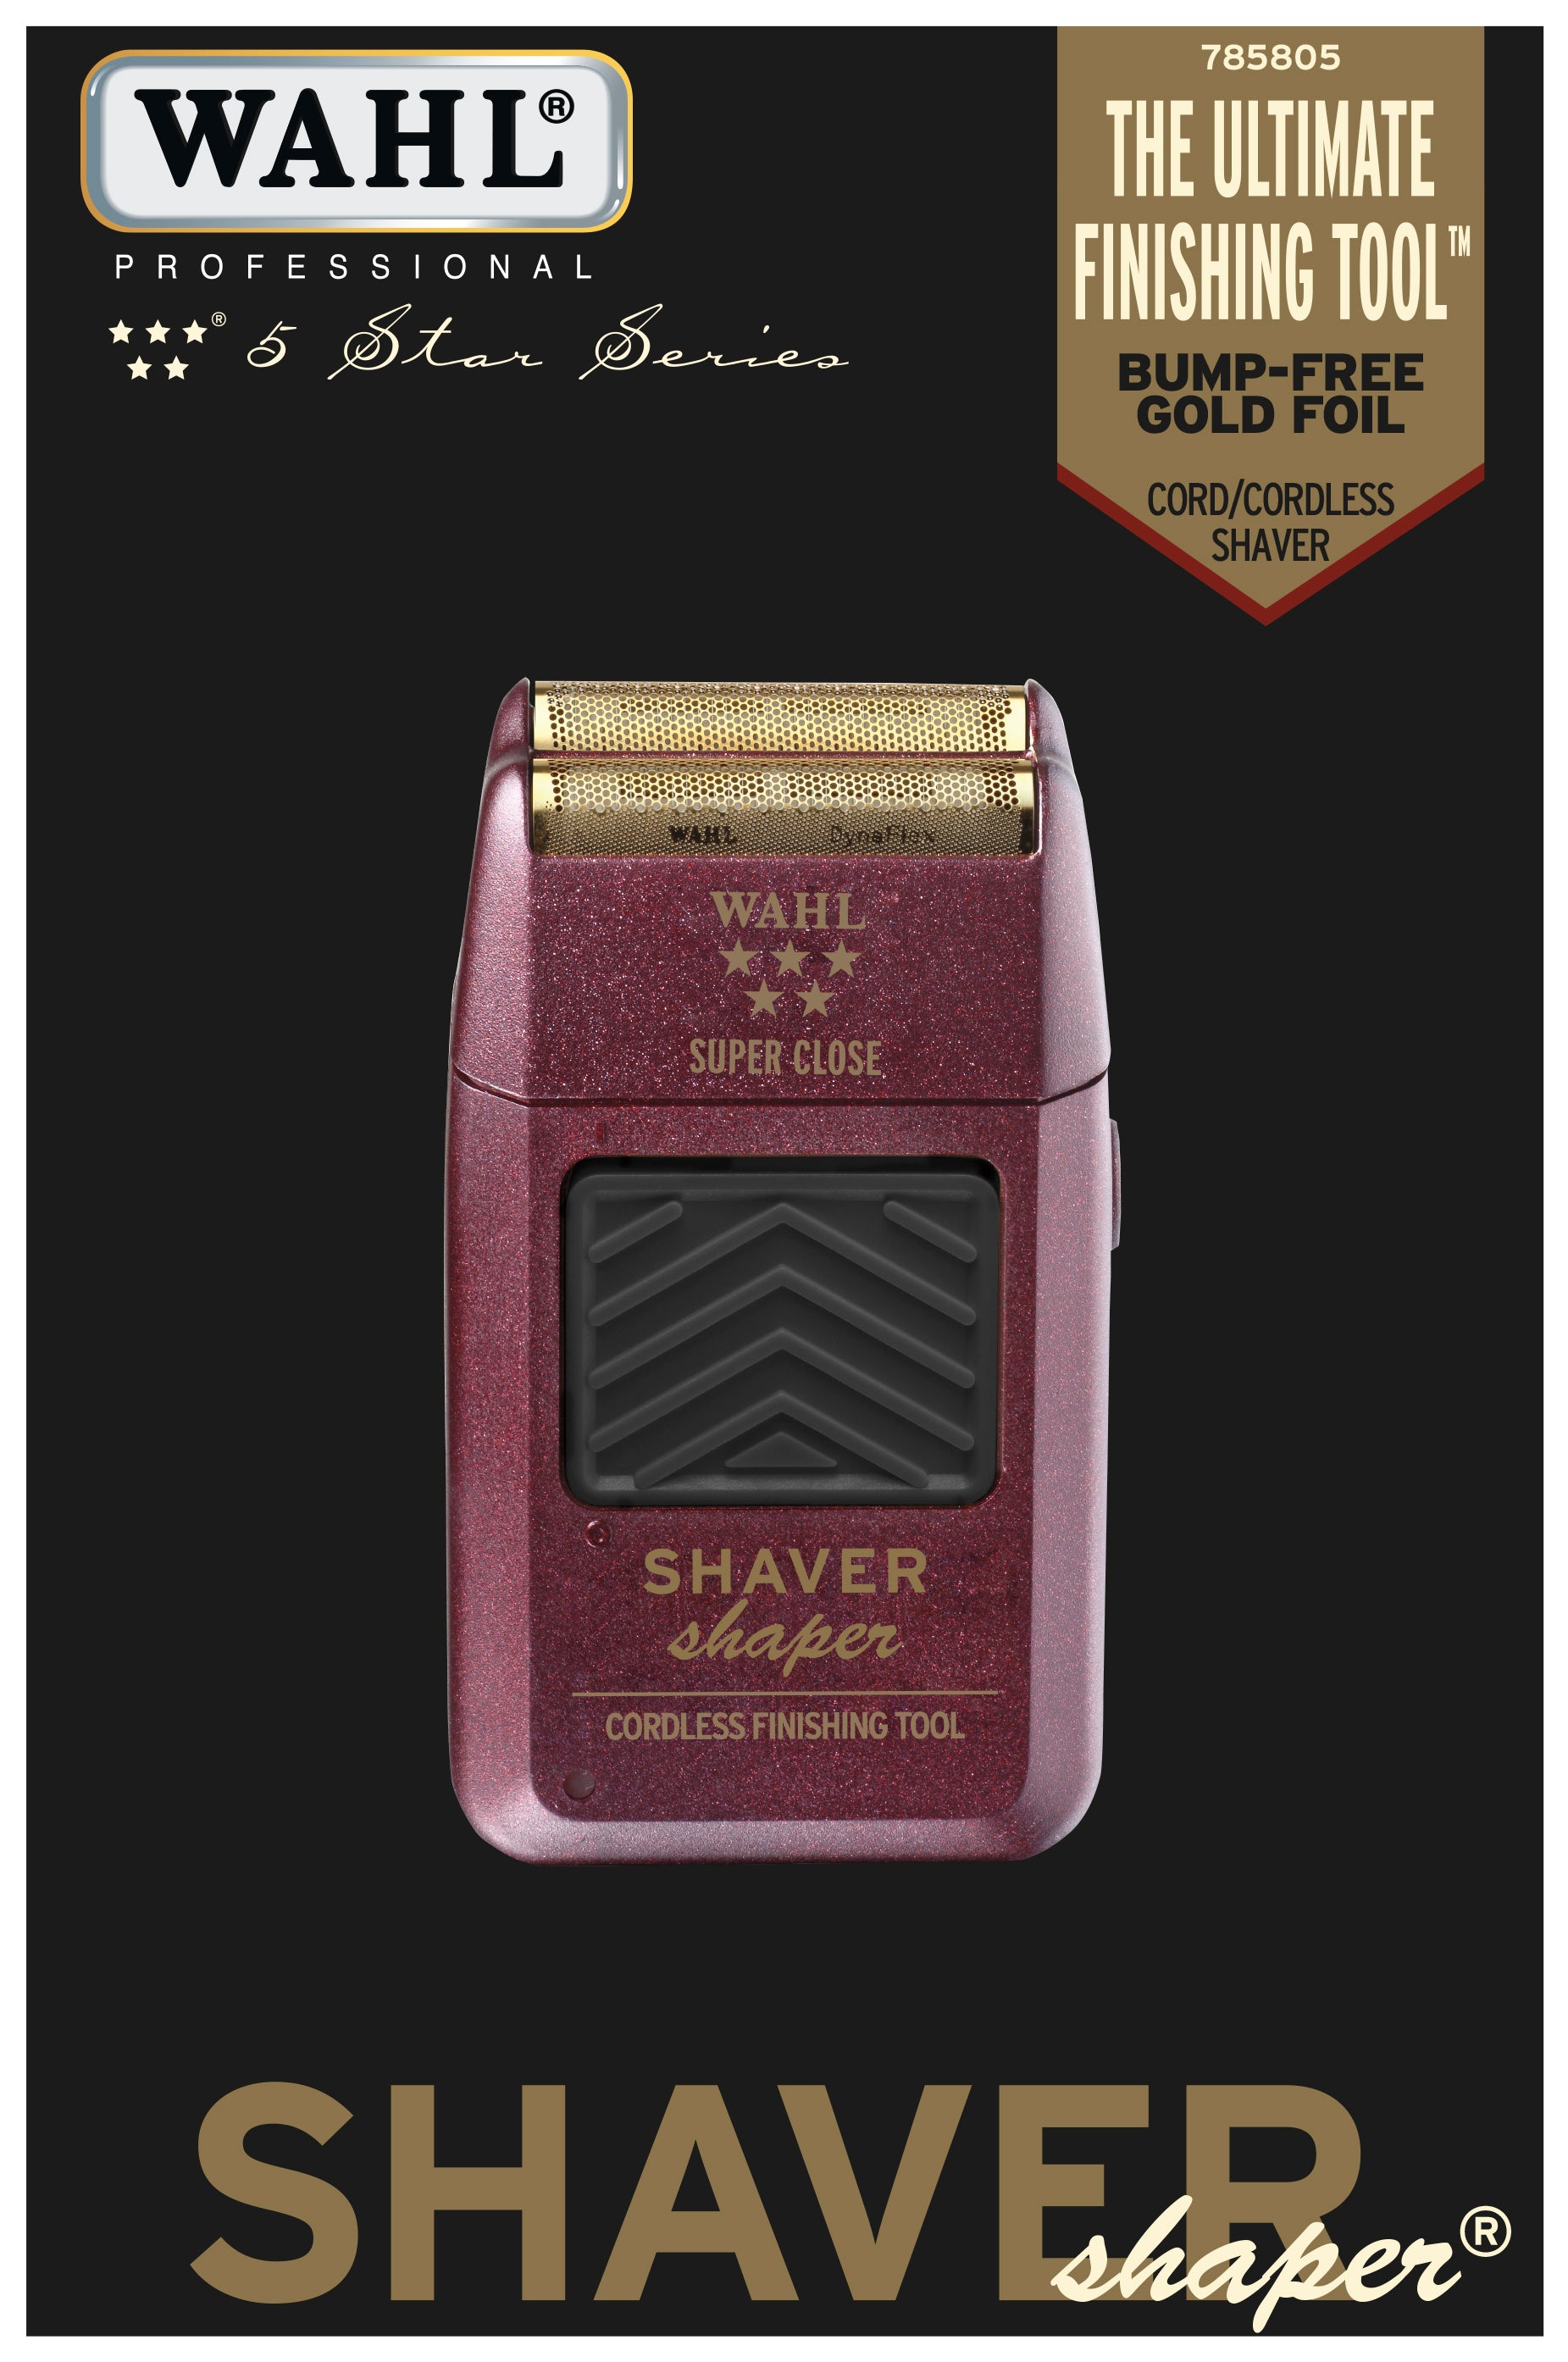 Wahl 5 Star Shaver / Shaper - Creata Beauty - Professional Beauty Products